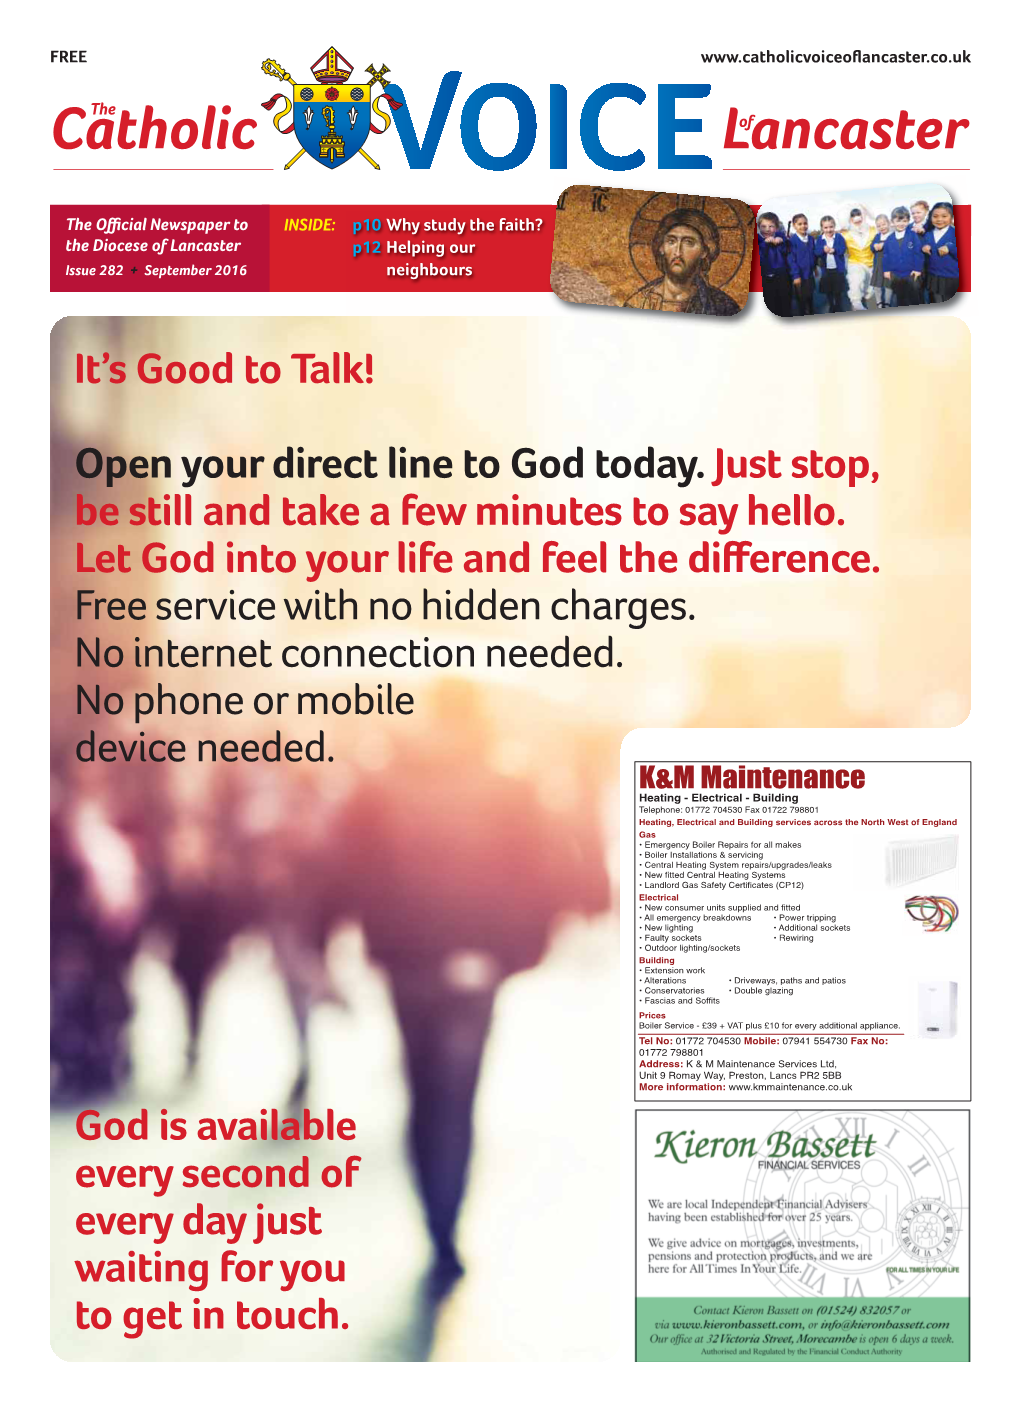 It's Good to Talk! Open Your Direct Line to God Today. Just Stop, Be Still And